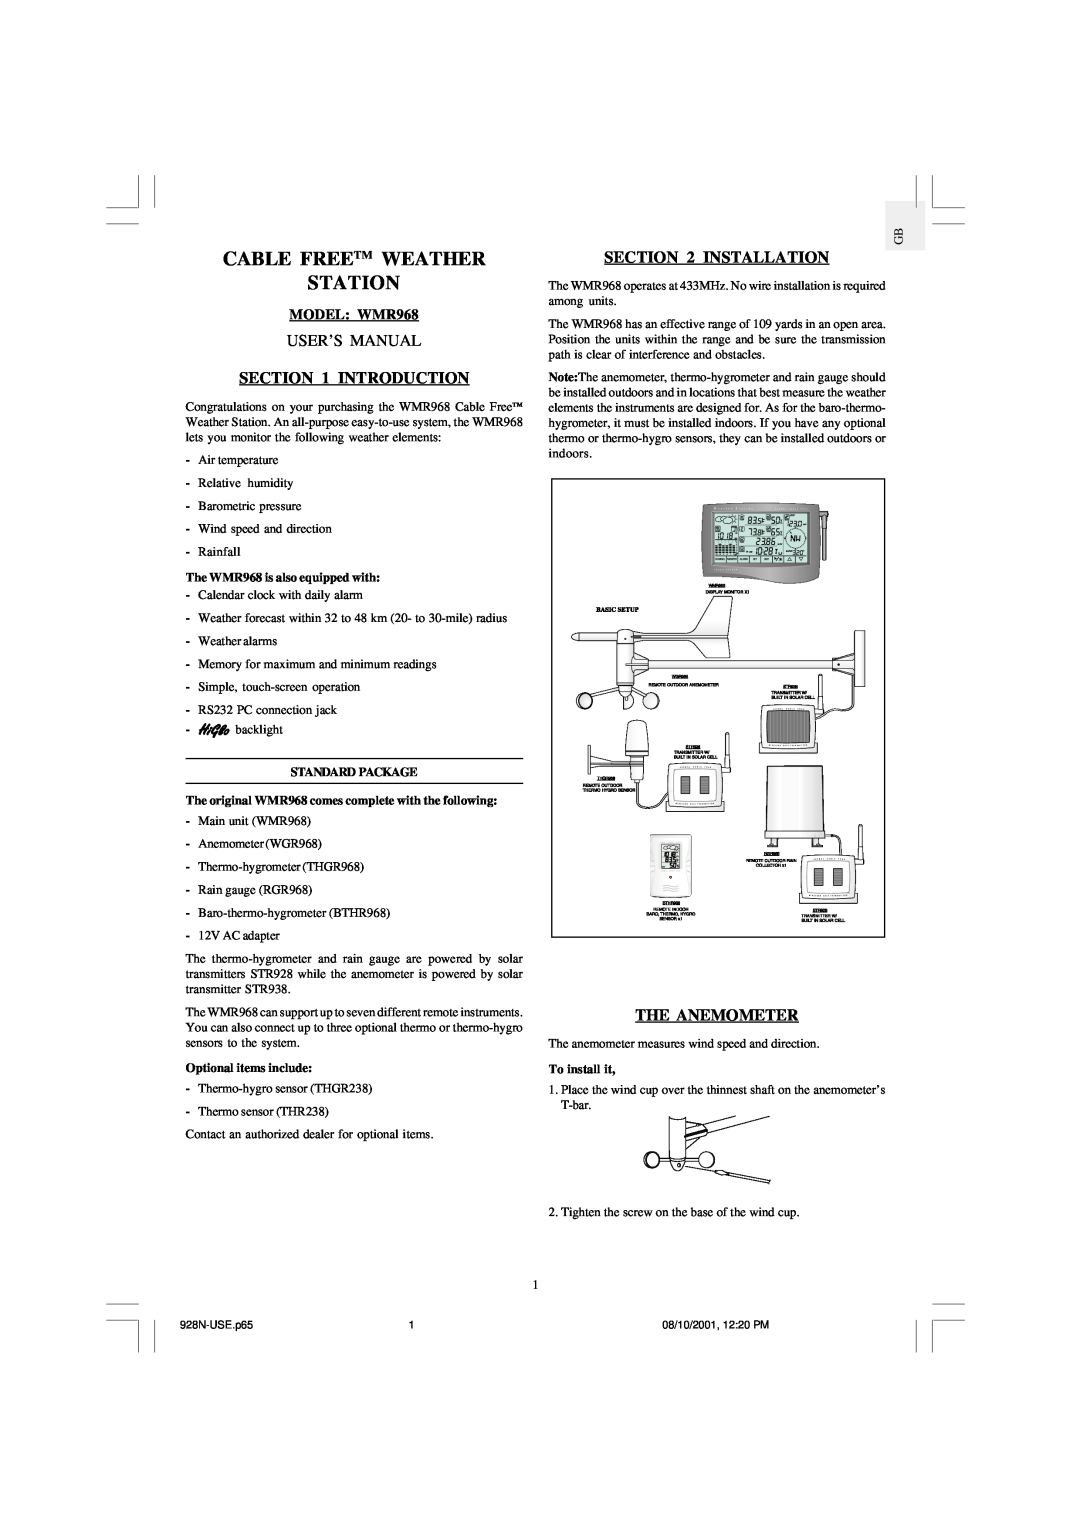 Oregon Scientific user manual Introduction, Installation, The Anemometer, MODEL WMR968, Cable Freetm Weather Station 